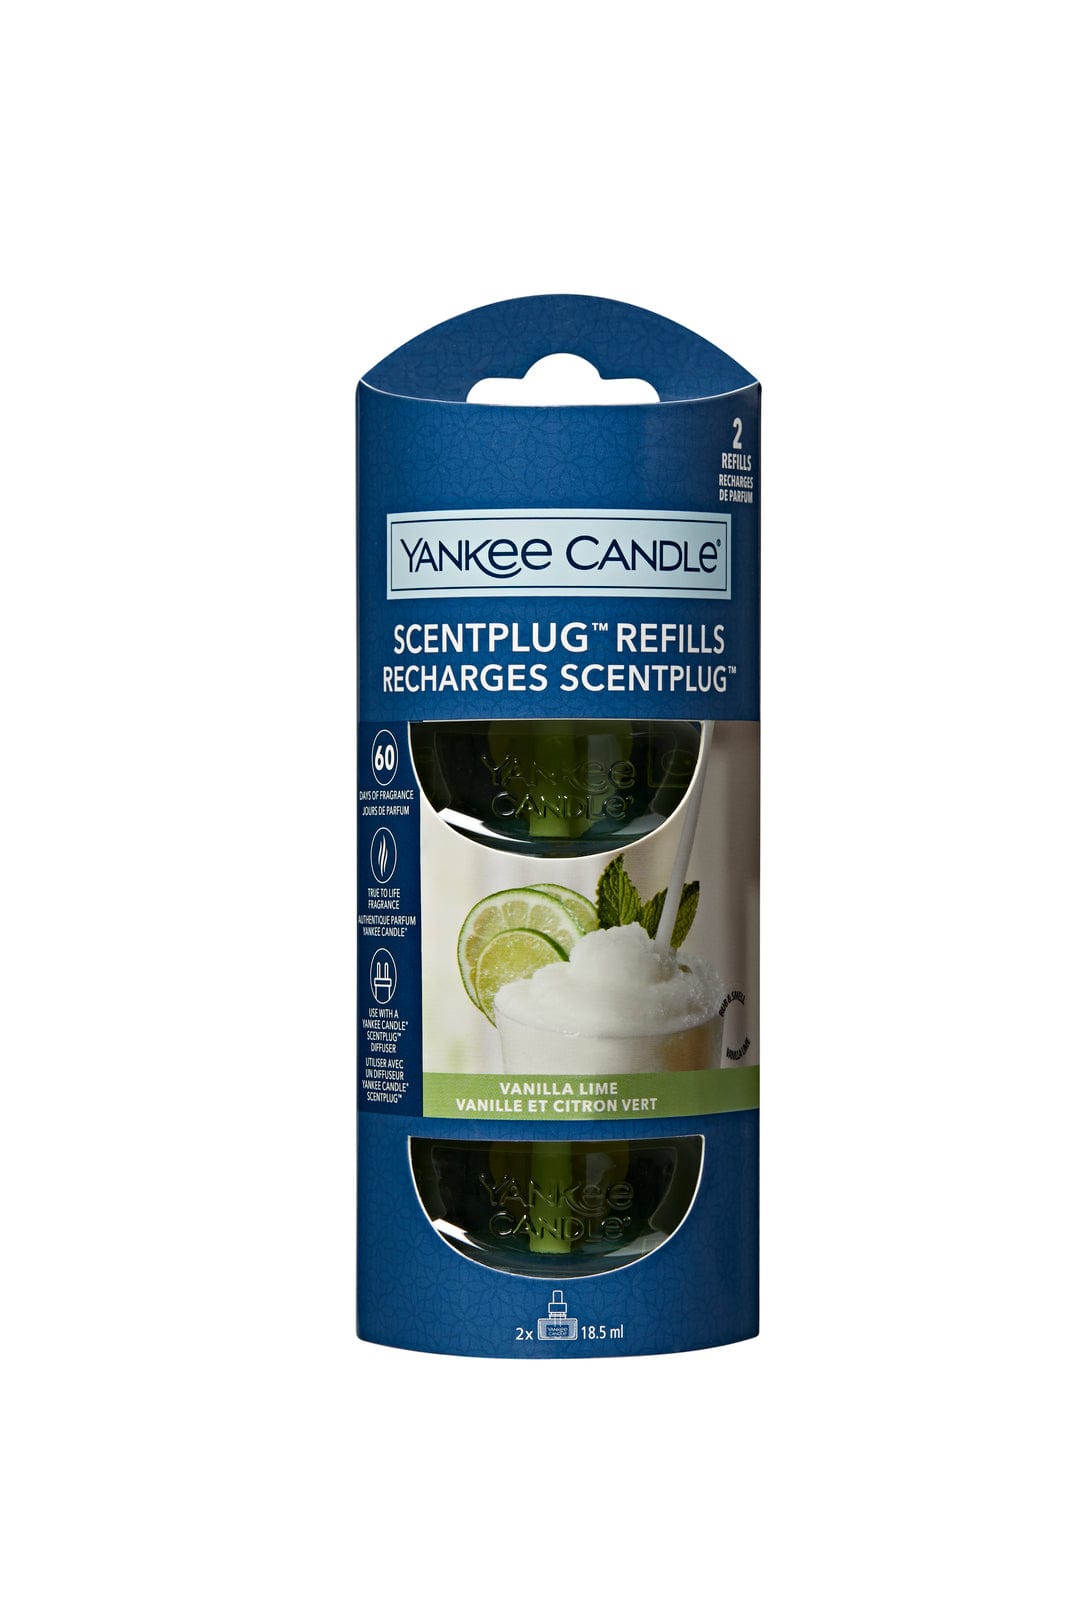 Yankee Candle Plug In Refill Yankee Candle Scentplug Refill Twin Pack - Vanilla Lime